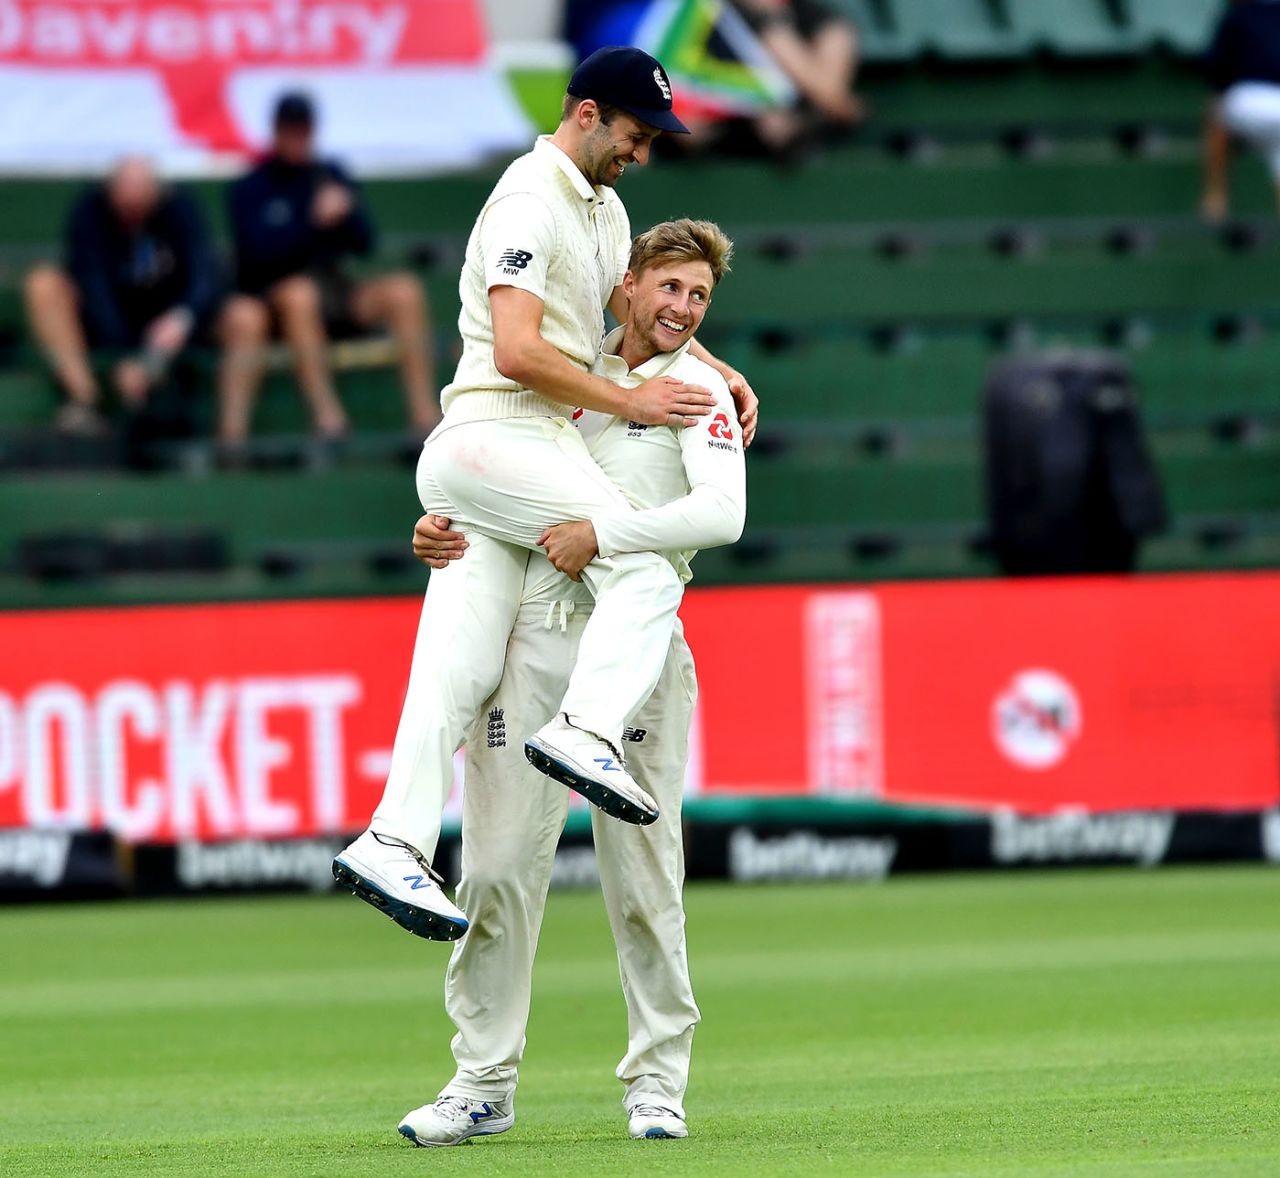 Joe Root and Mark Wood of England celebrate the wicket of Faf du Plessis, South Africa v England, 3rd Test, Port Elizabeth, 4th day, January 19, 2020